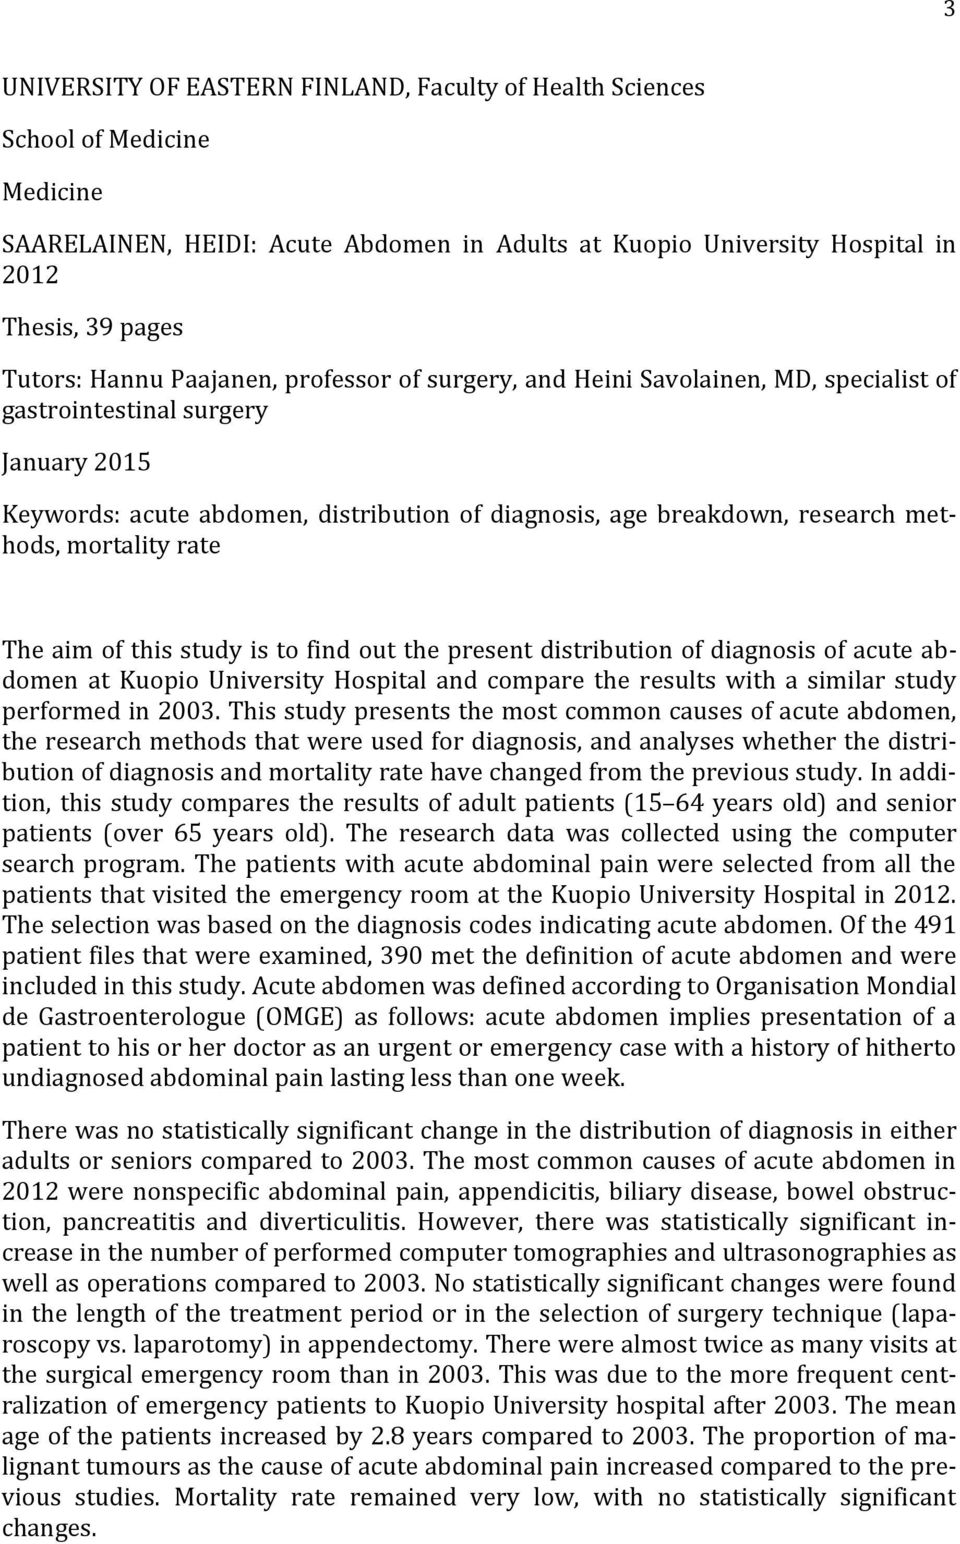 methods, mortality rate The aim of this study is to find out the present distribution of diagnosis of acute abdomen at Kuopio University Hospital and compare the results with a similar study